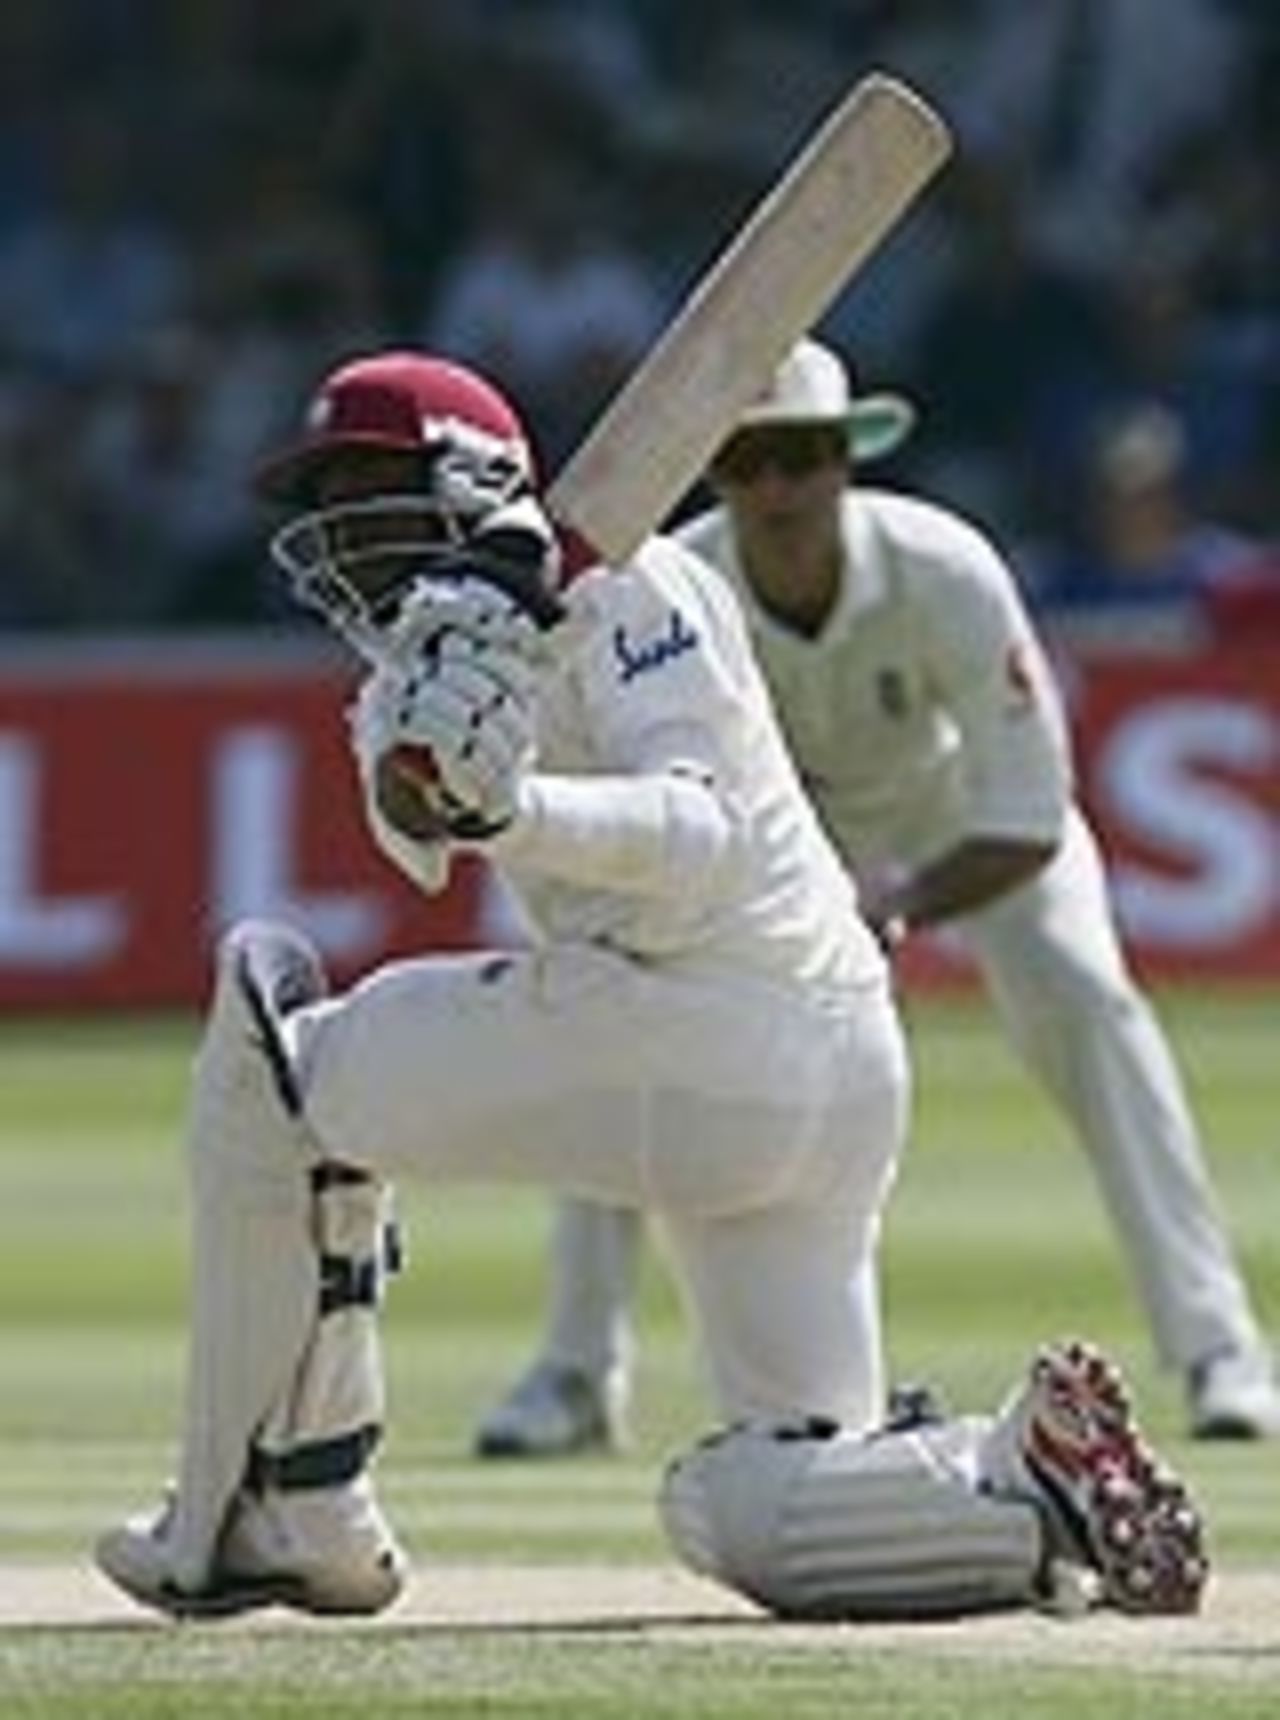 Dwayne Bravo sweeps during his Test debut innings, England v West Indies, 1st Test, Lord's